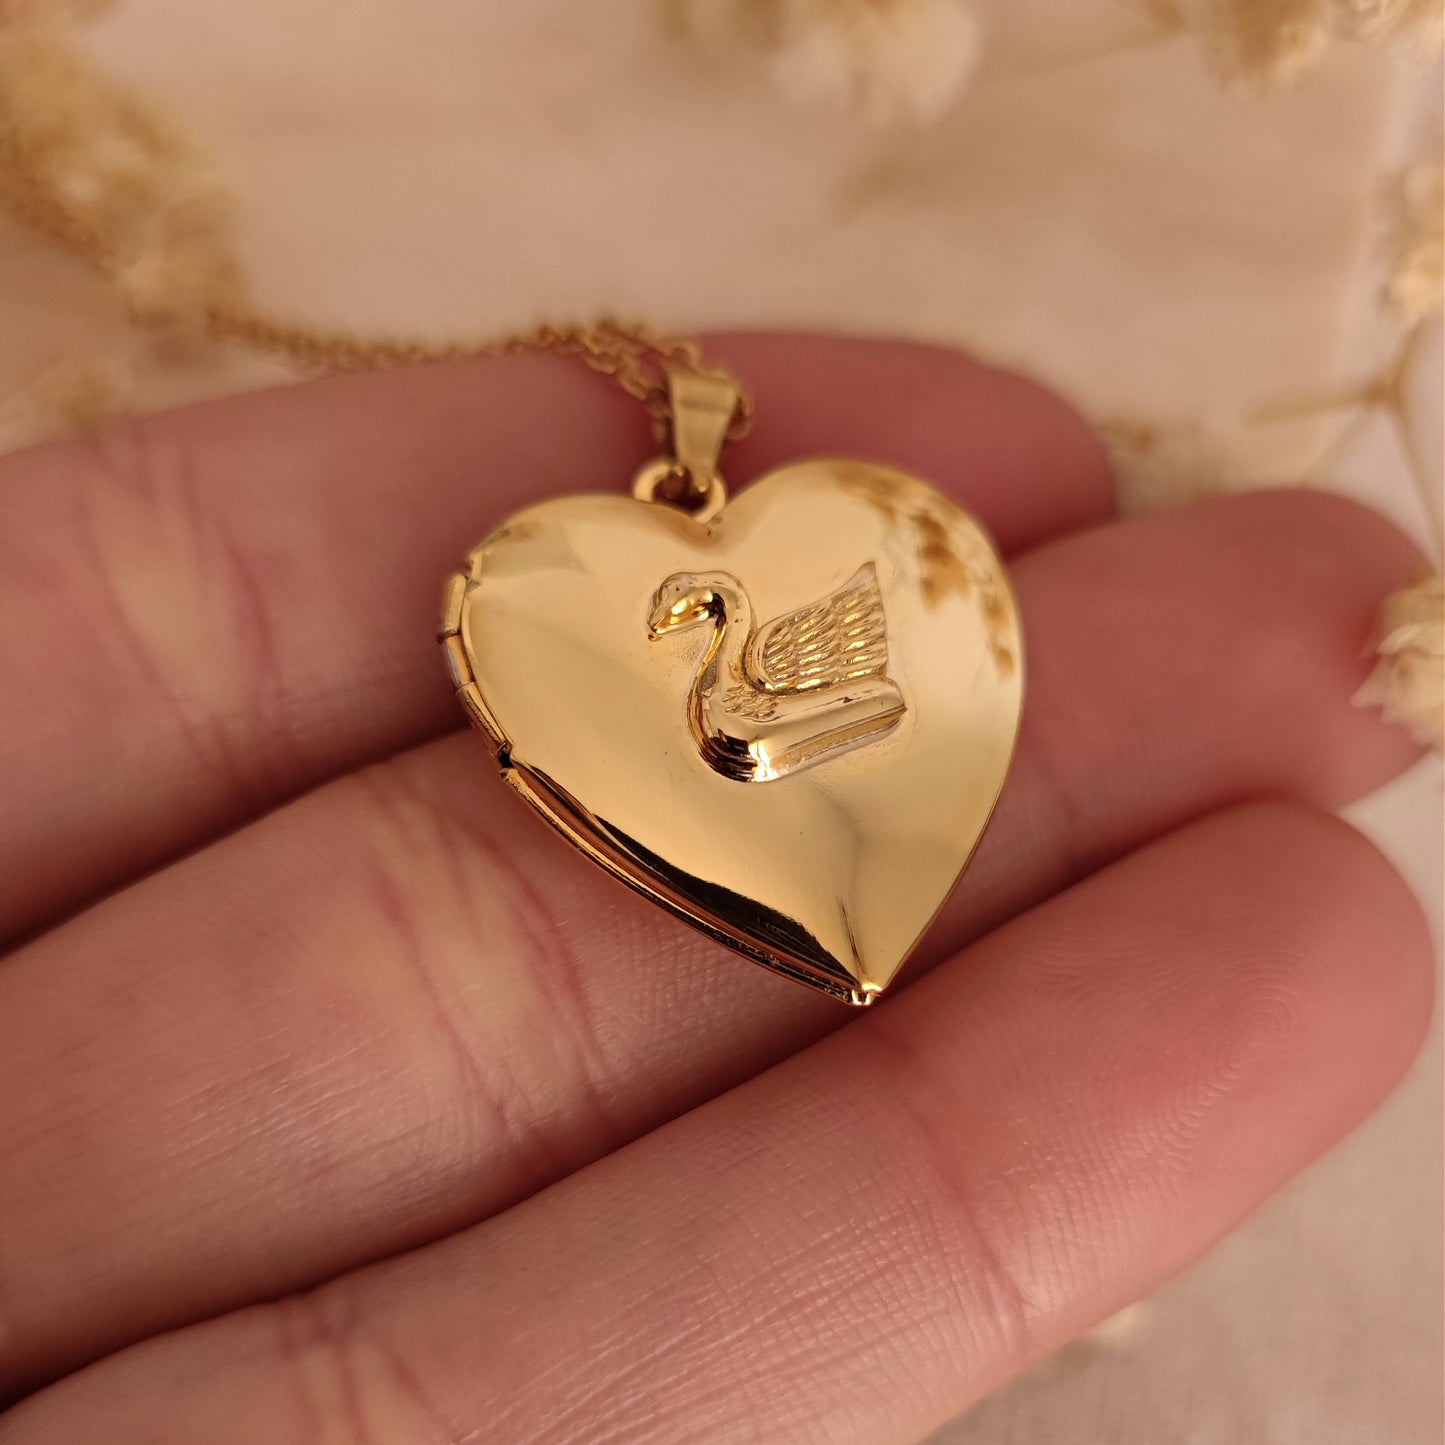 Princesscore Heart Locket Necklace with Swan